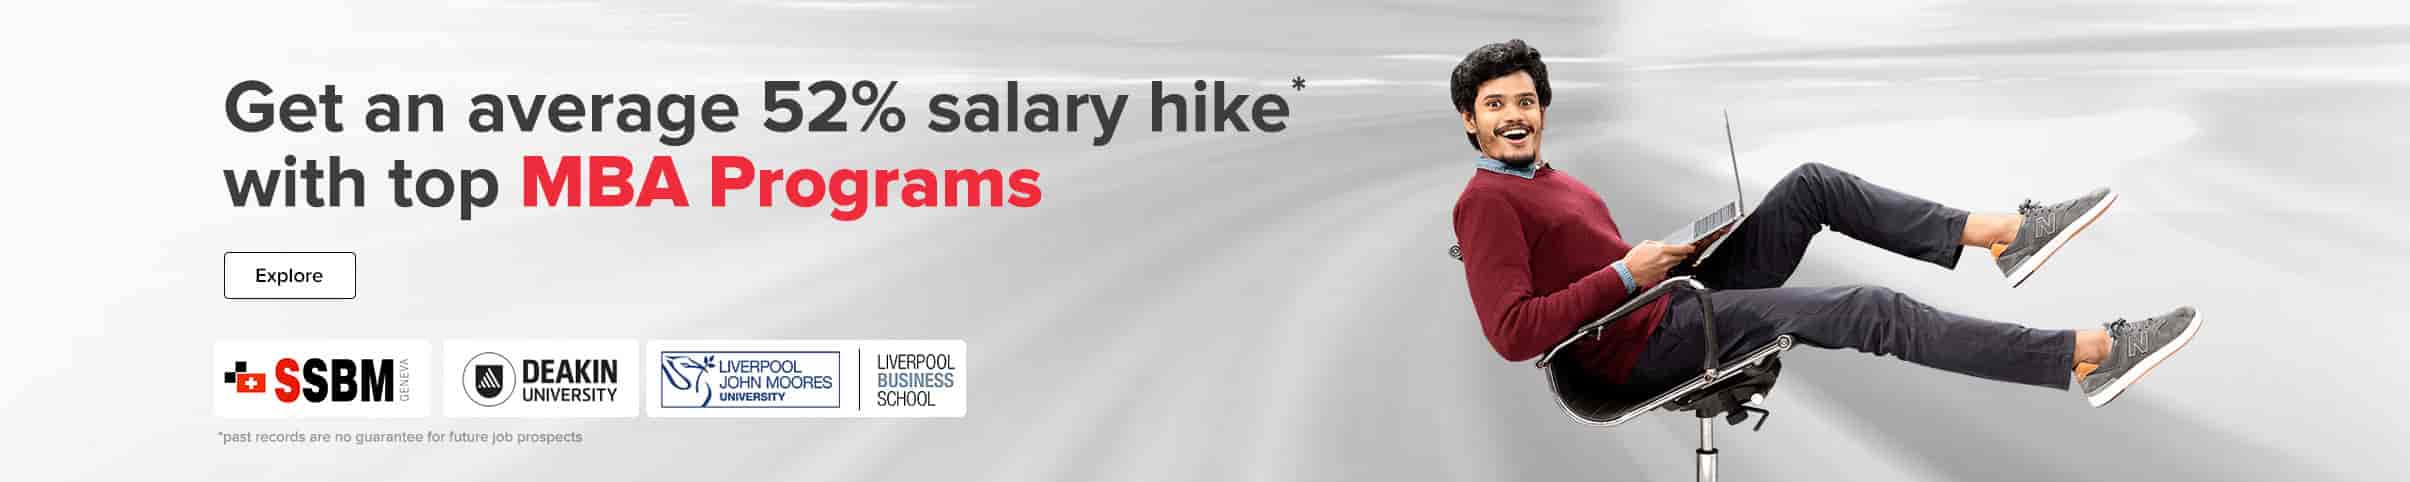 Get an average 52% salary hike with top MBA Programs